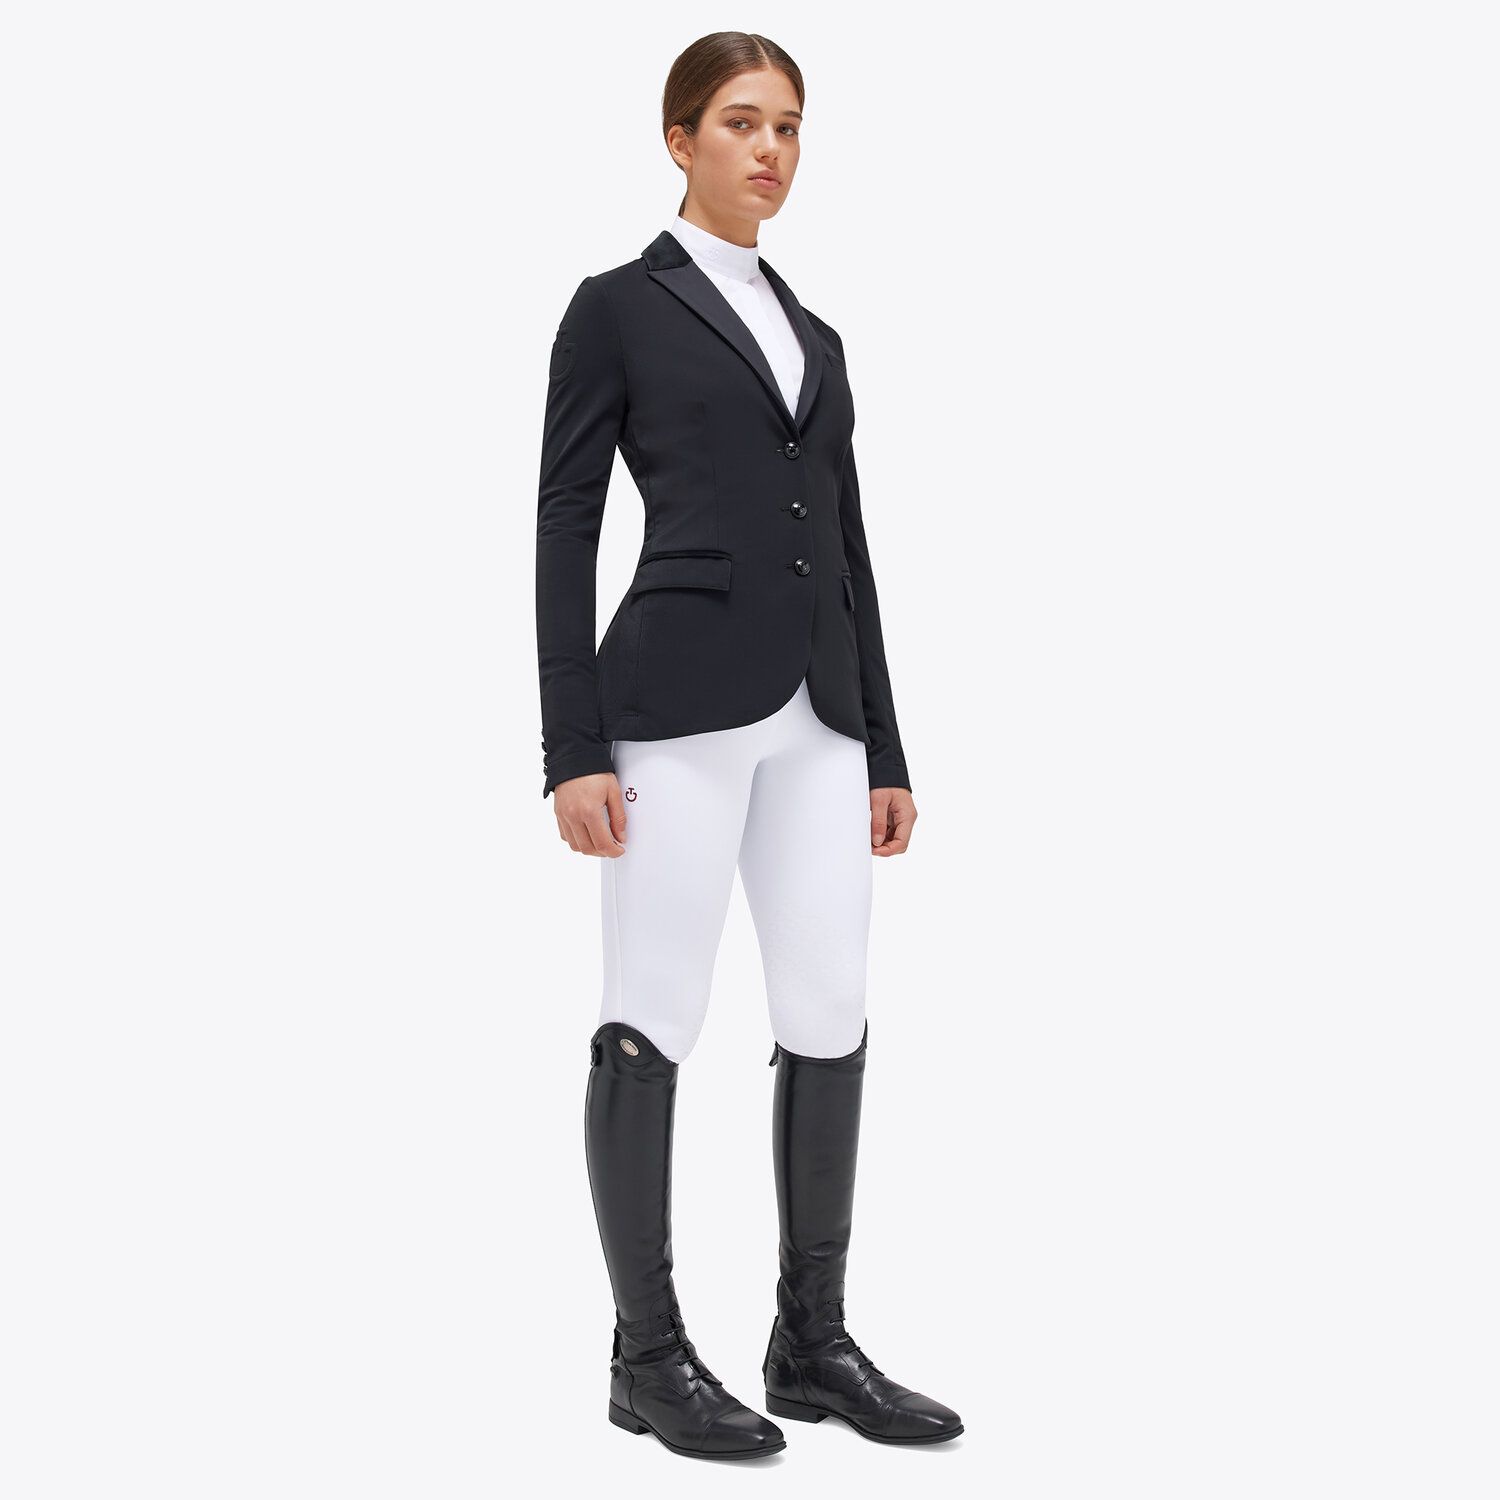 Cavalleria Toscana Women's competition riding jacket embroidery BLACK-1